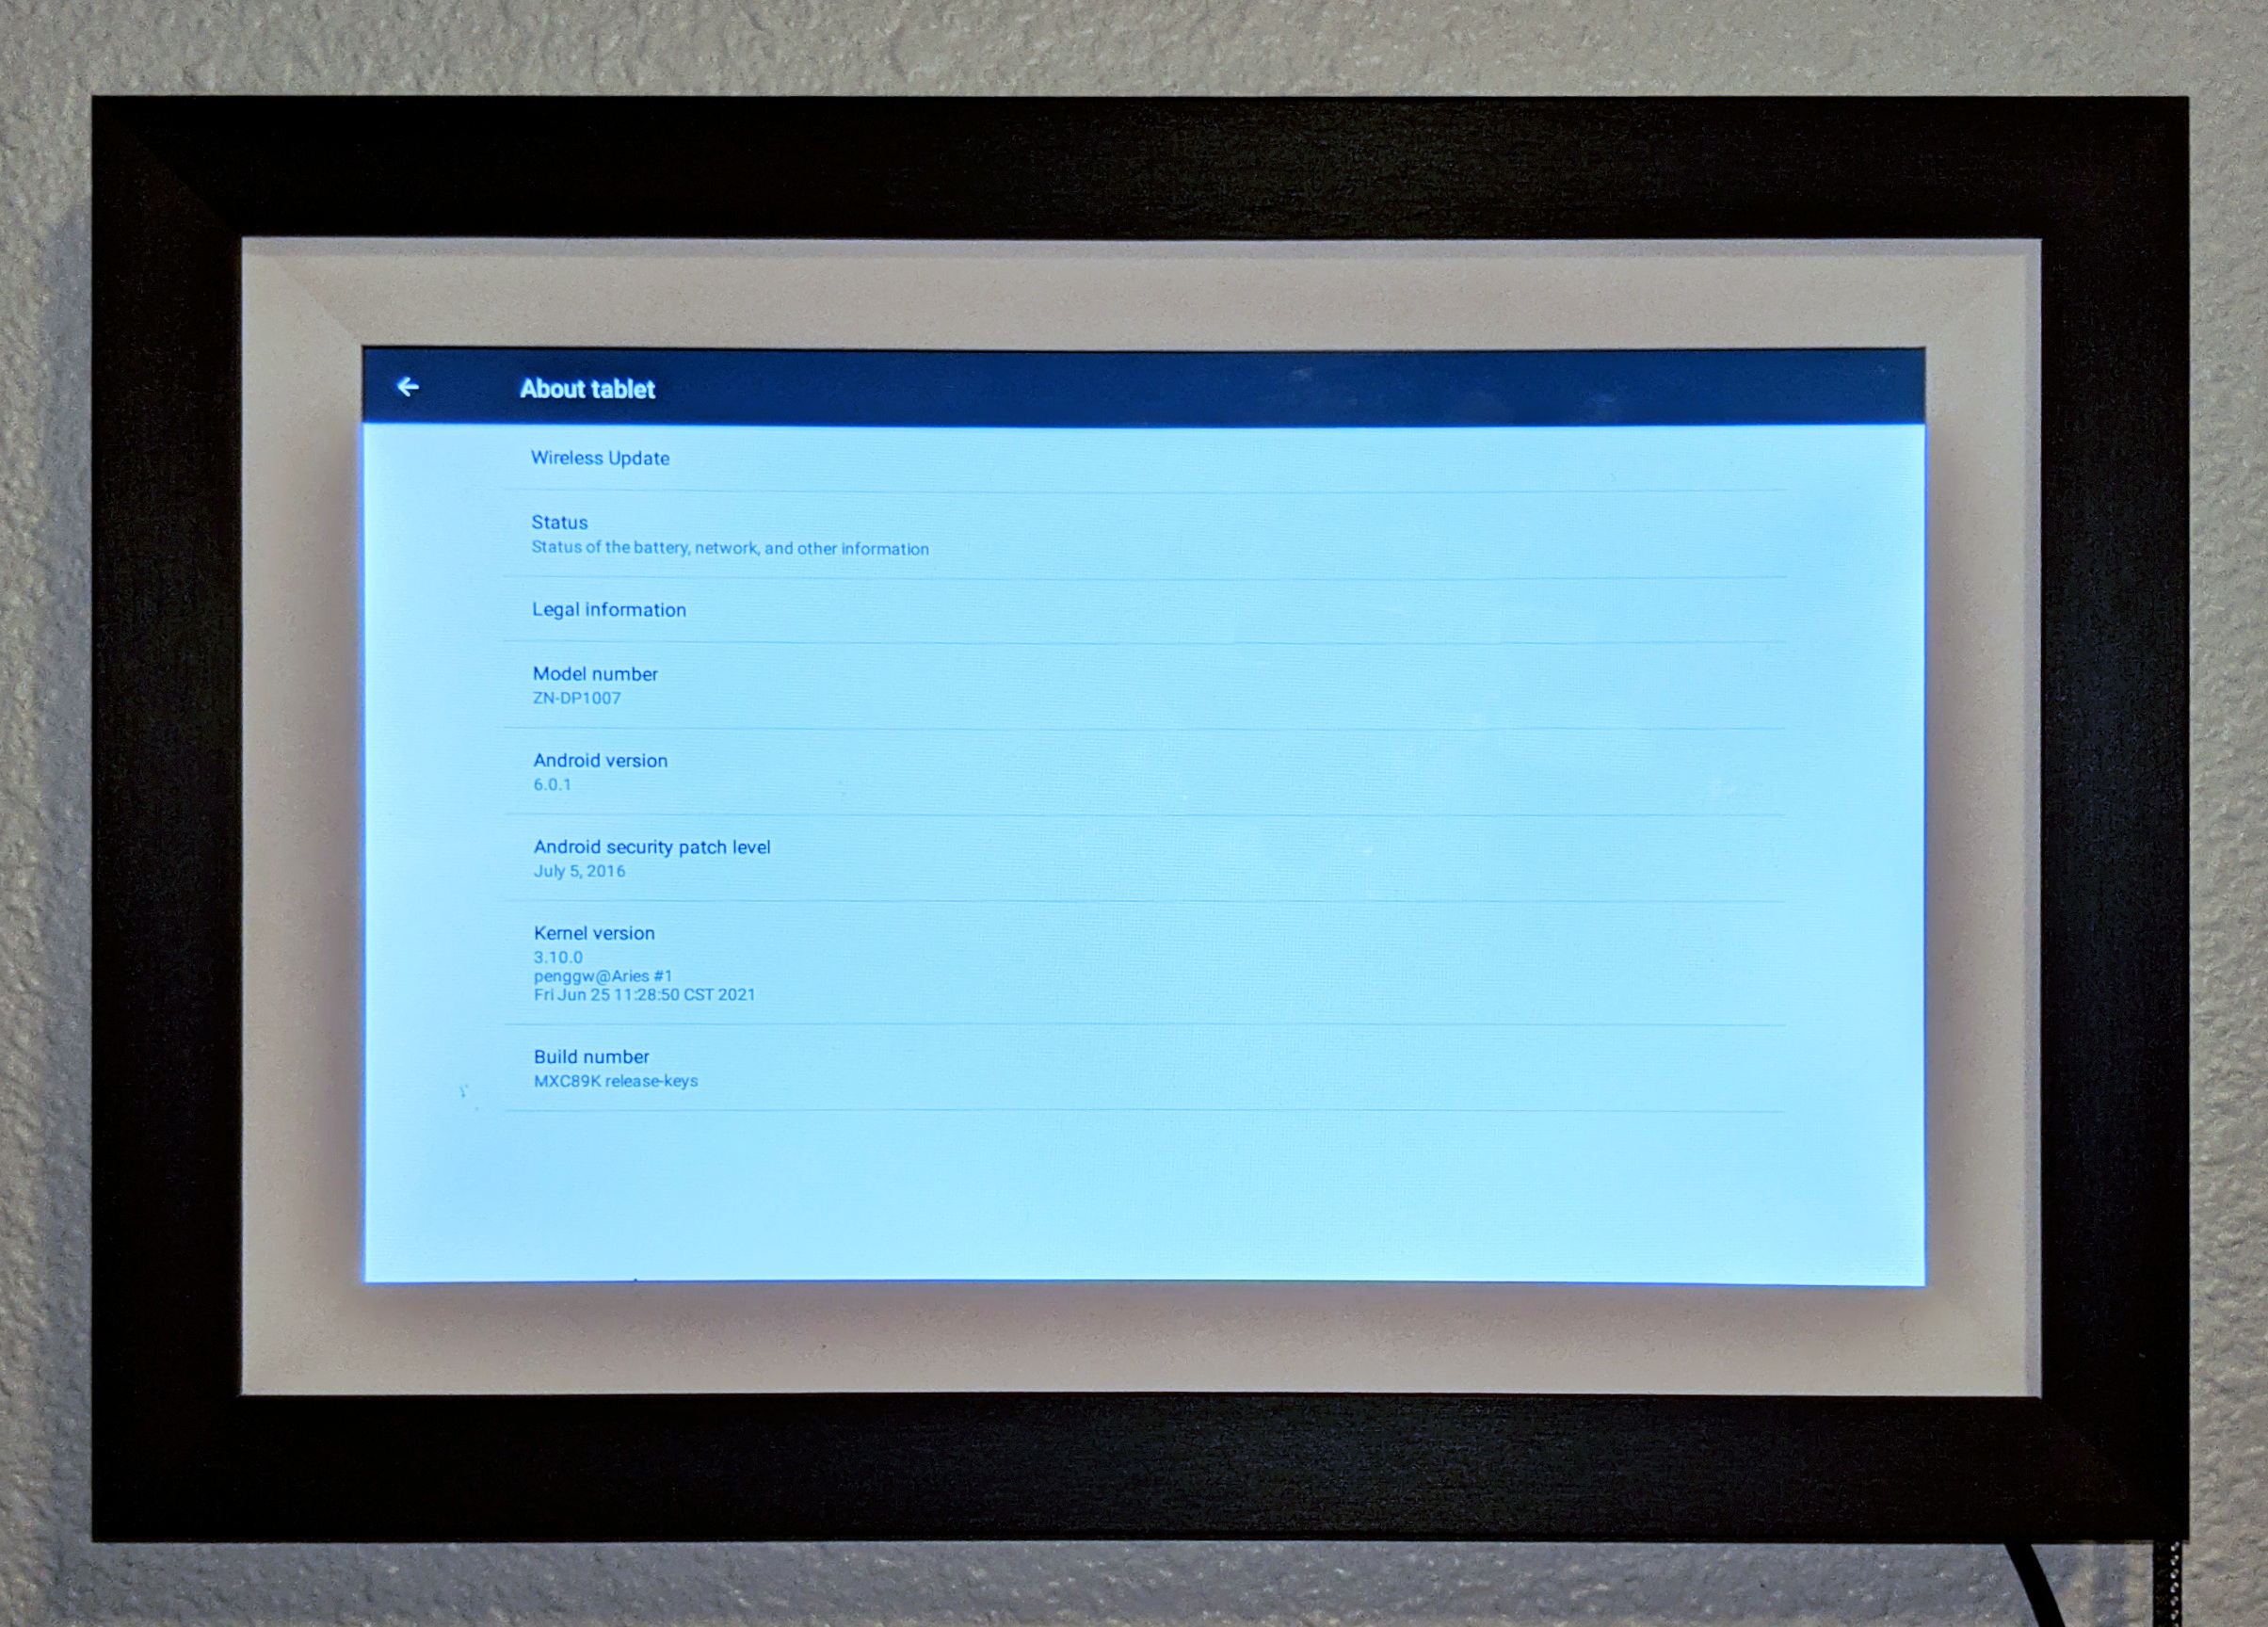 My digital picture frame turned out to be running Android 6.0.1